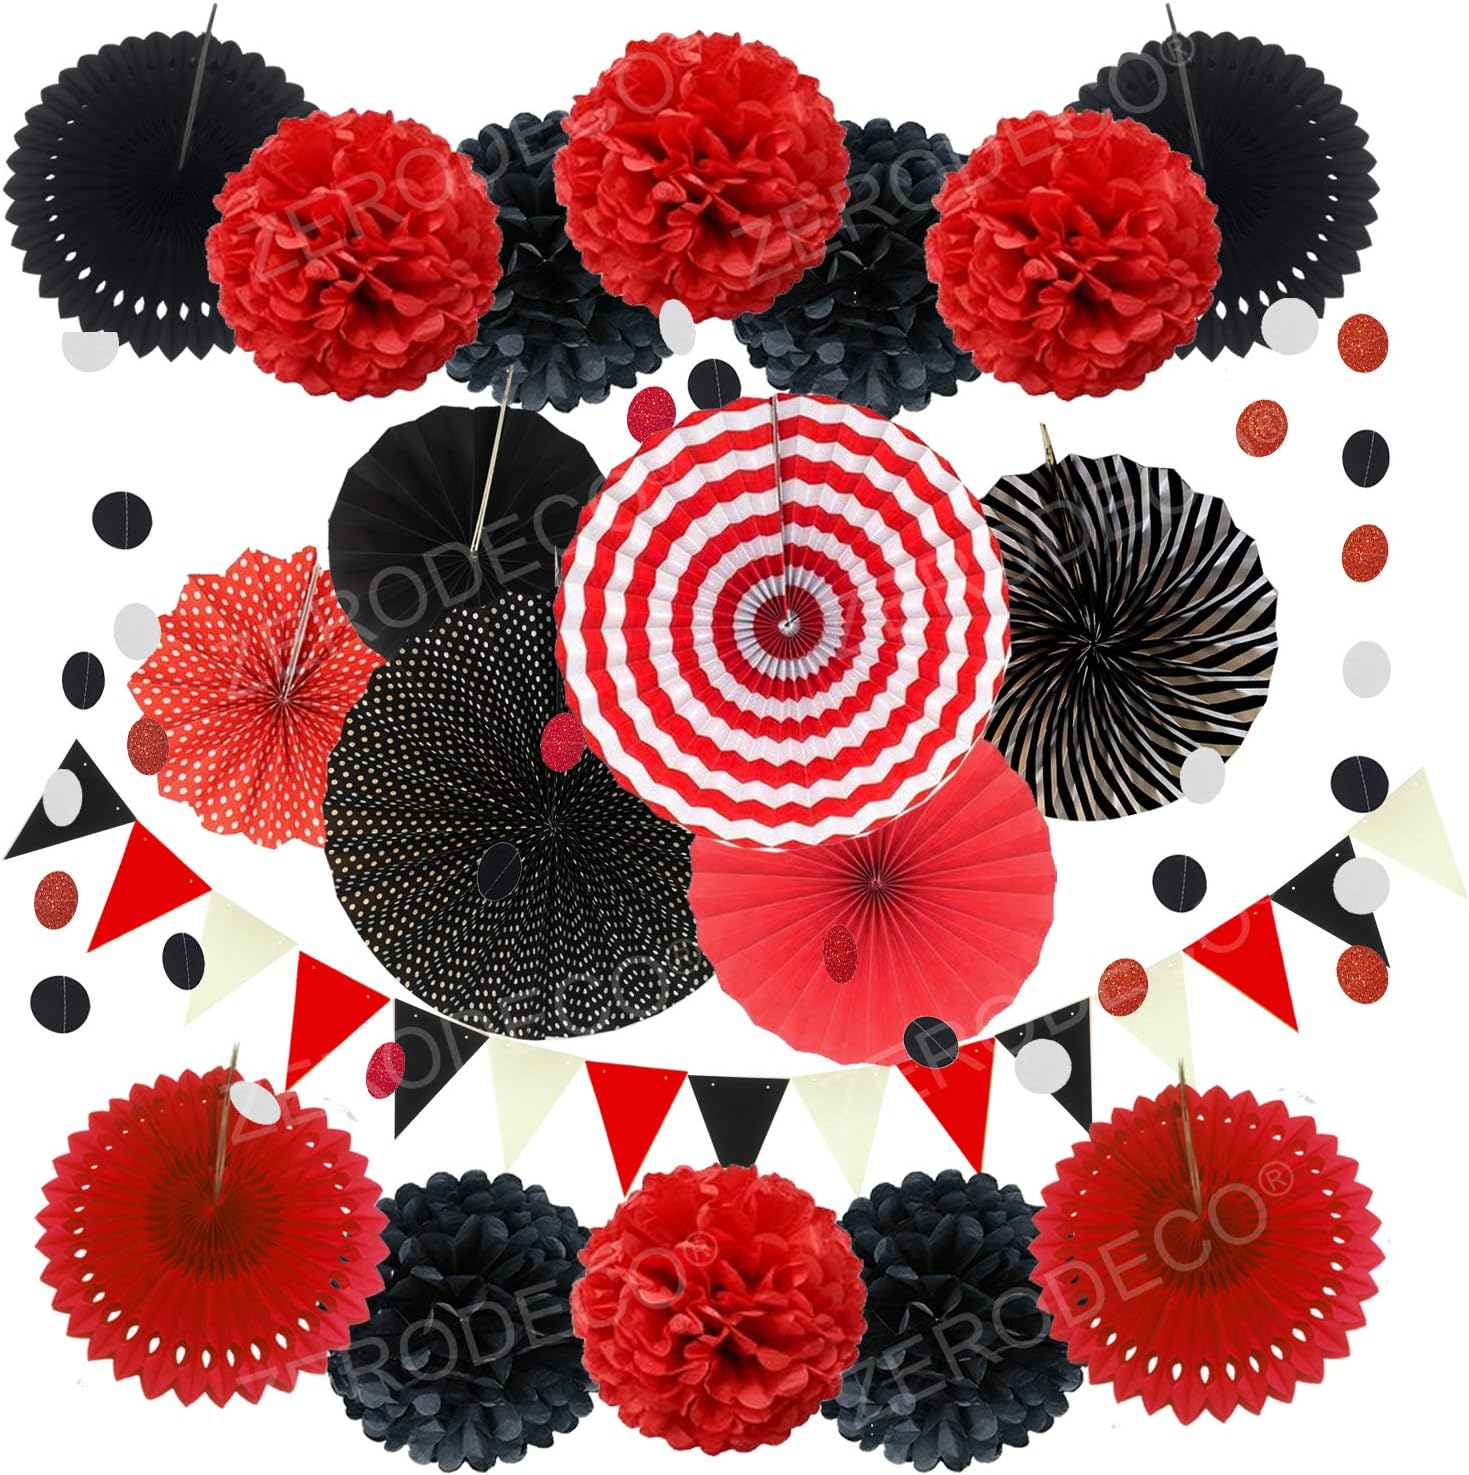 ZERODECO Party Decoration, 21 Pcs Black and Red Hanging Paper Fans Pom Poms Flowers, Garlands String Polka Dot and Triangle Bunting Flags for Minnie Mouse Birthday Parties Baby Showers Wedding